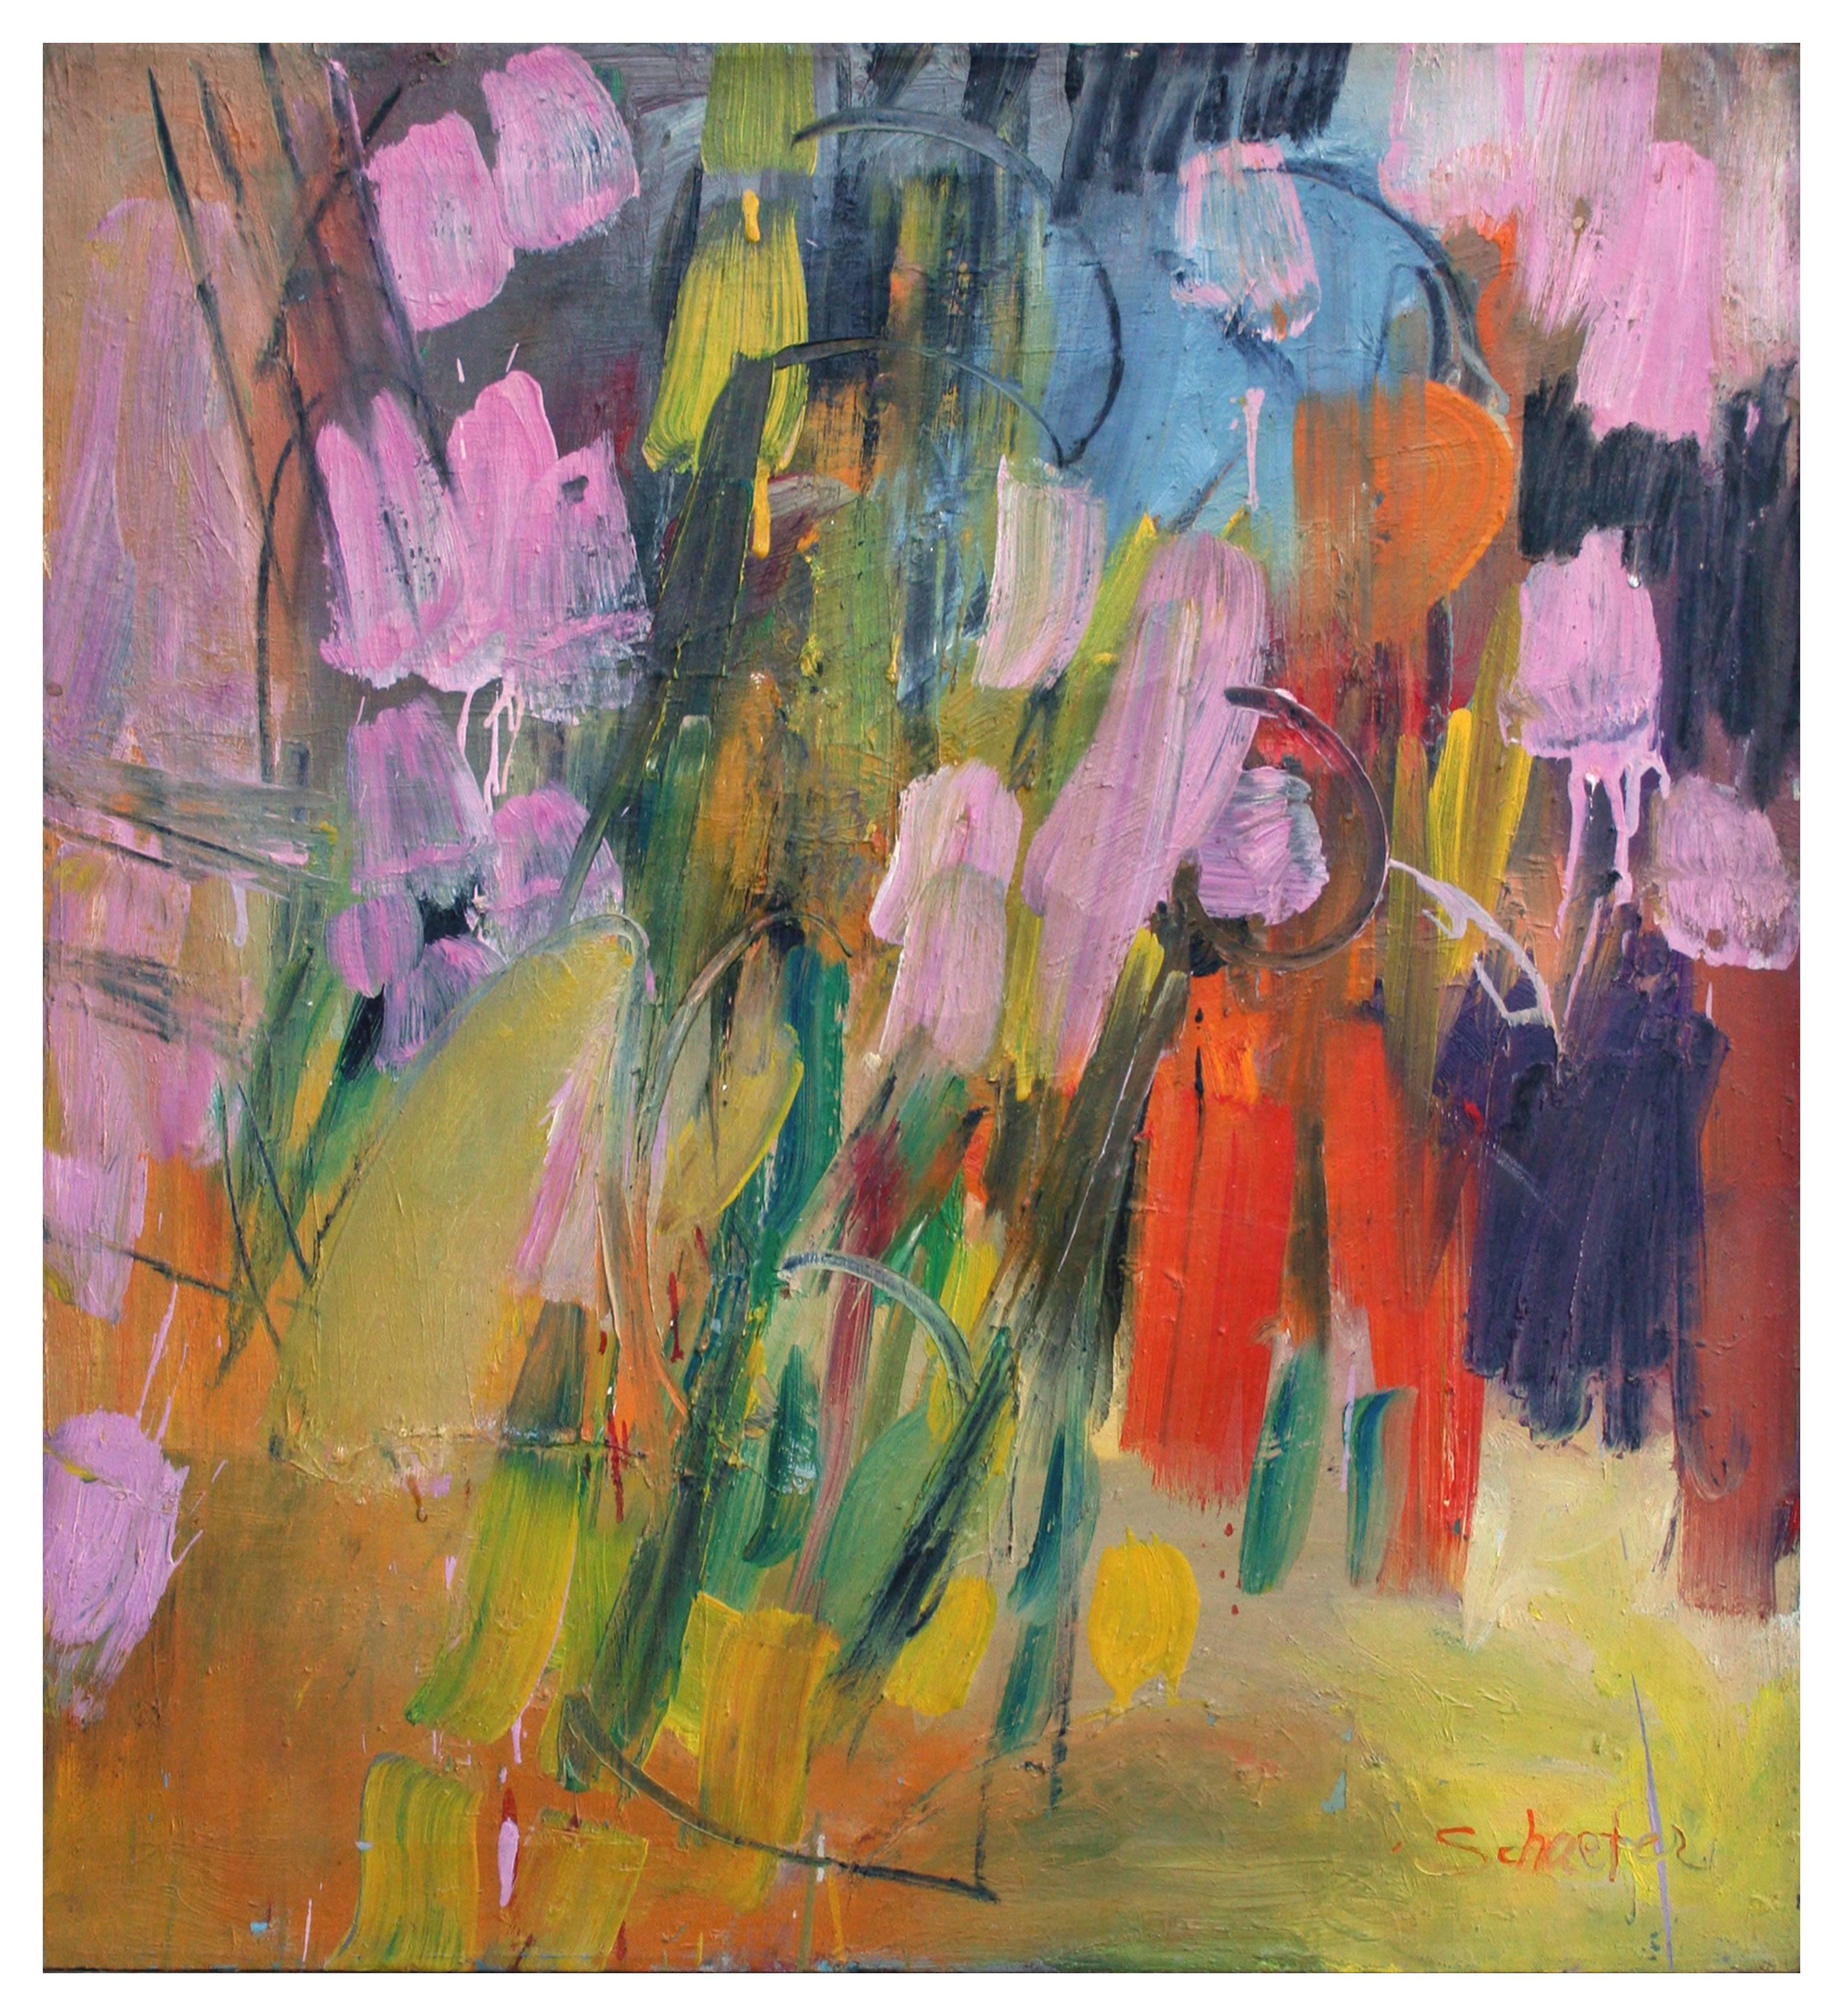 Composition with Pink and Orange, Cranbrook - Painting by Marilyn L. Schaefer